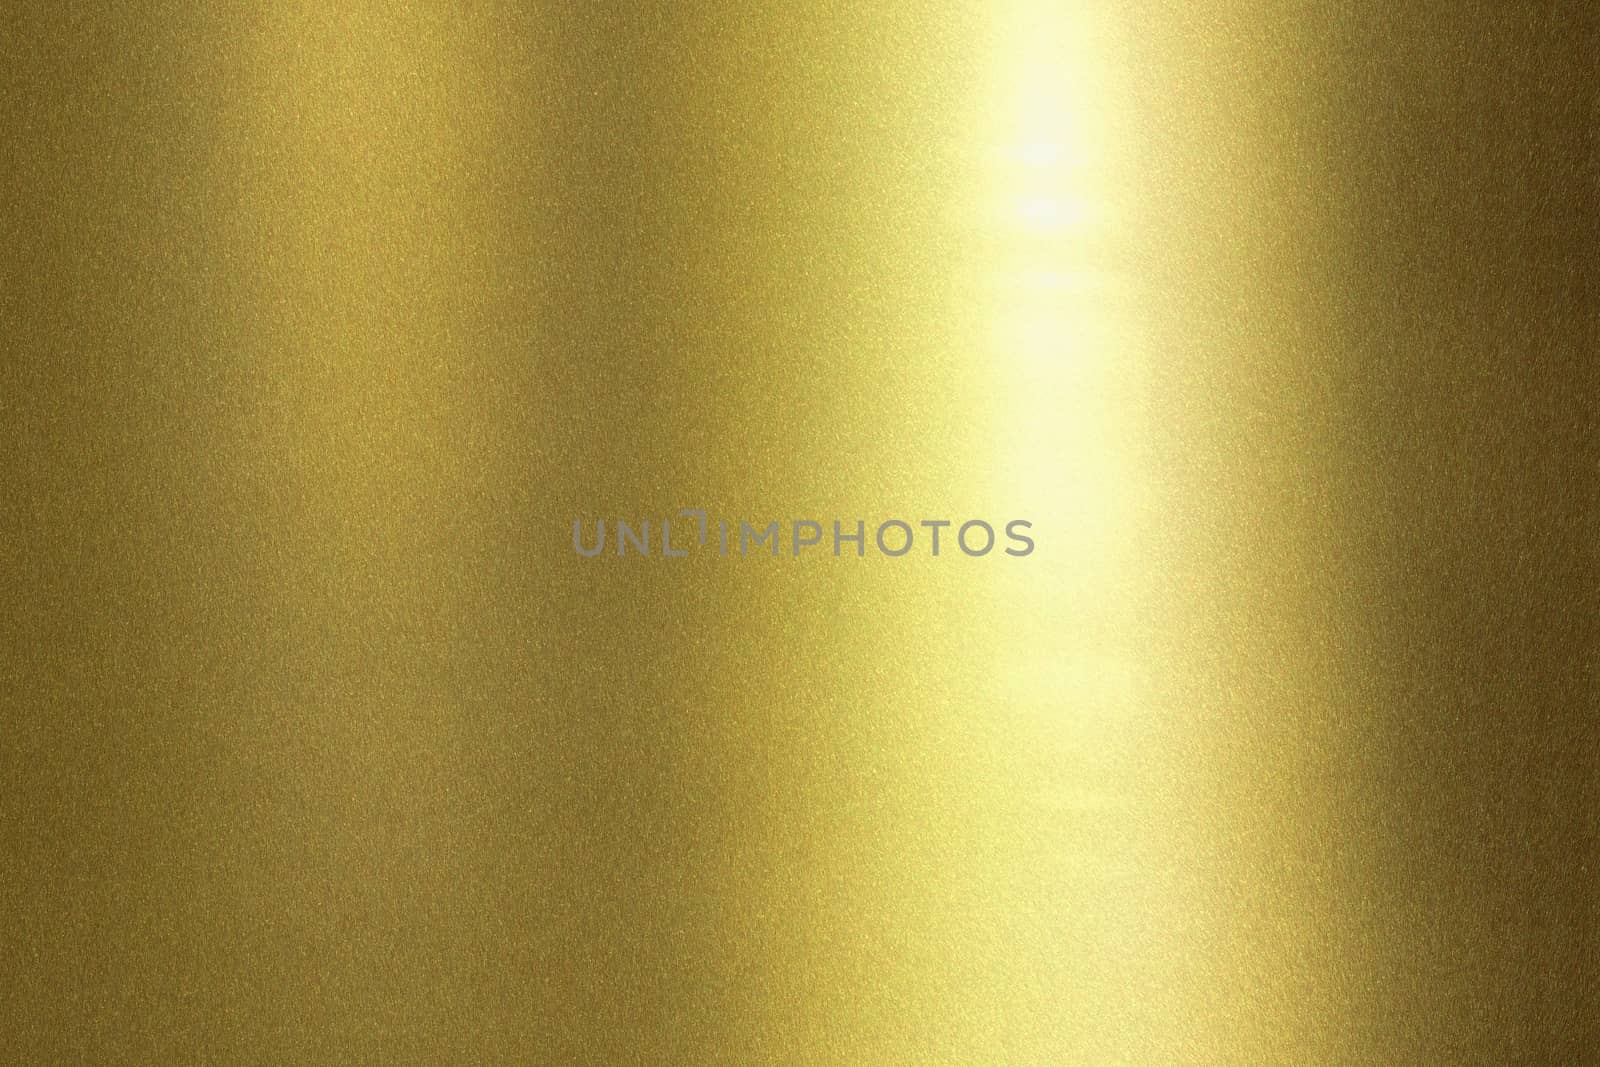 Light shining on wave golden metal wall, abstract texture background